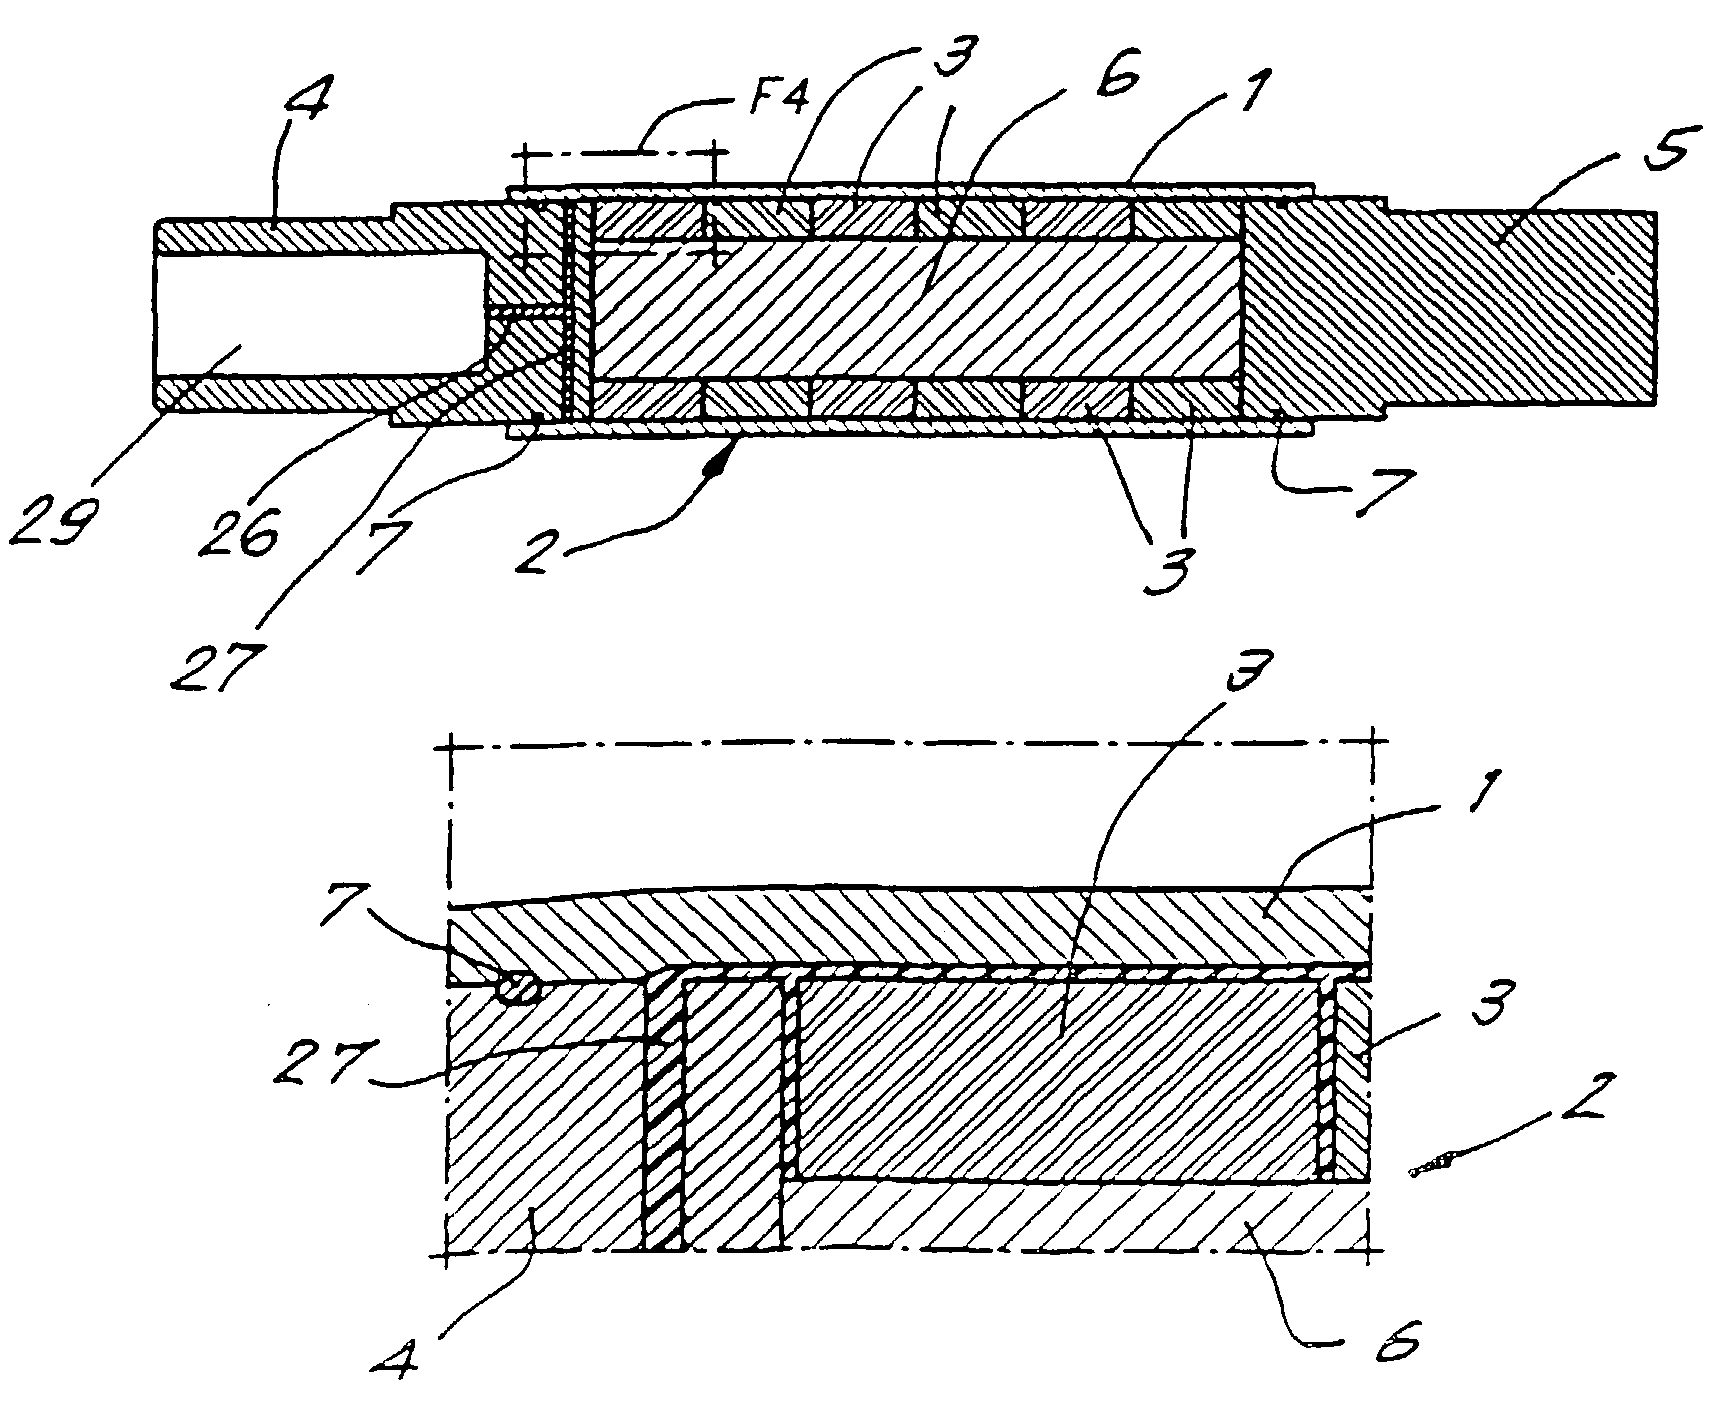 Method for manufacturing a permanent-magnet excited rotor for a high speed electric motor